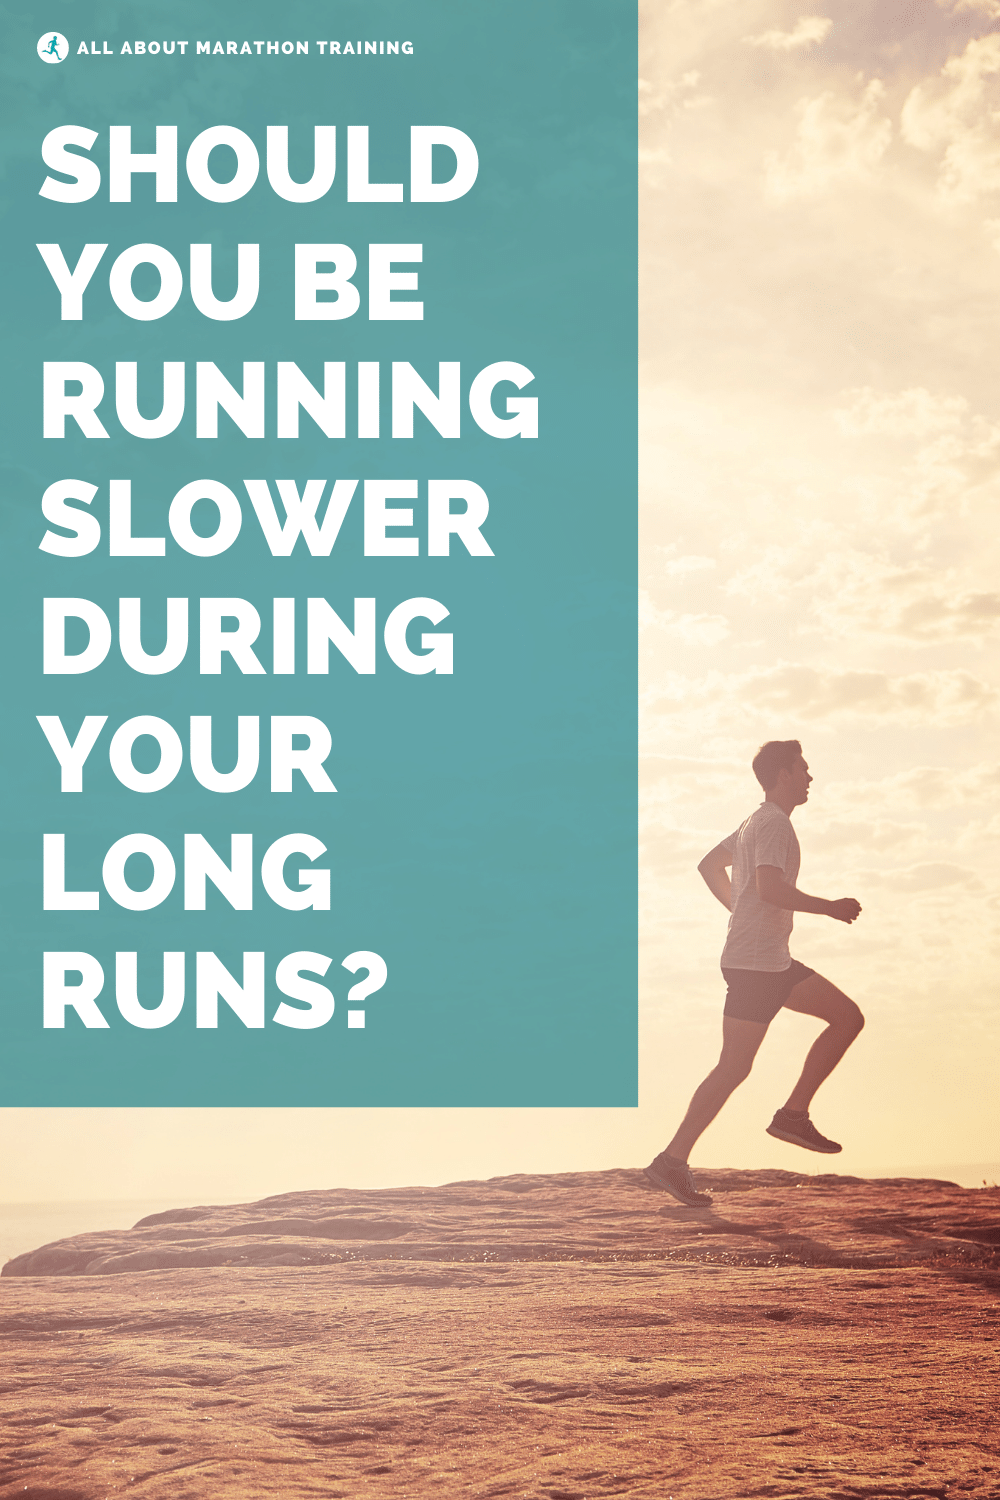 Why You Might Struggle to Hold Your Goal Marathon Pace During Long